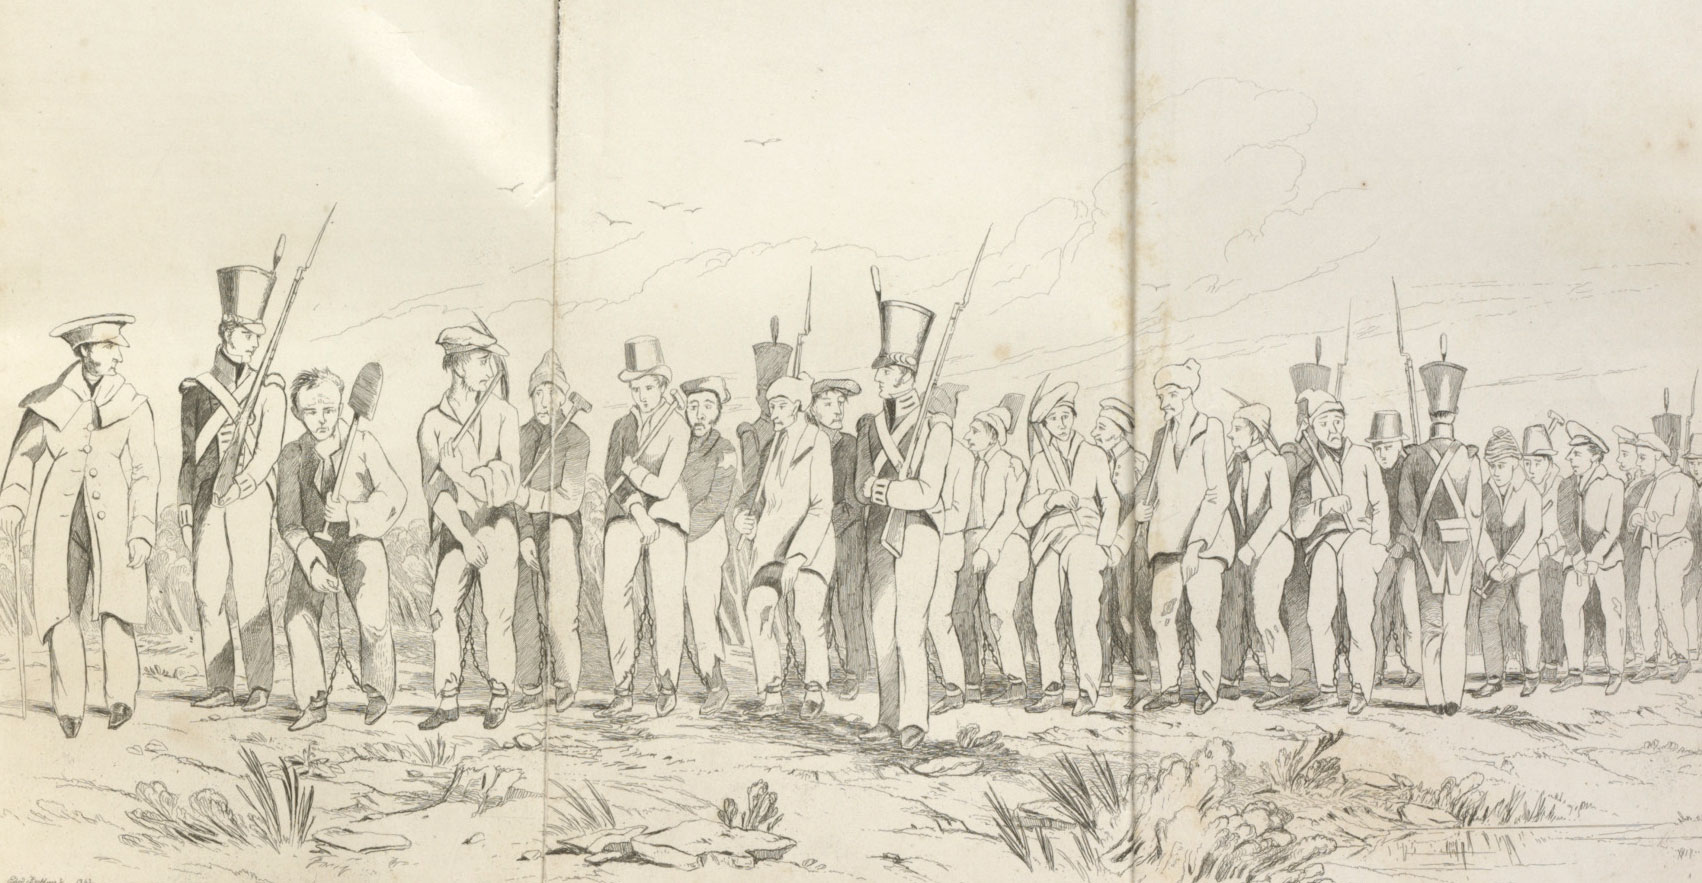 <p><em>A chain gang. Convicts going to work near Sidney</em> [sic], by Edward Backhouse, 1842</p>
